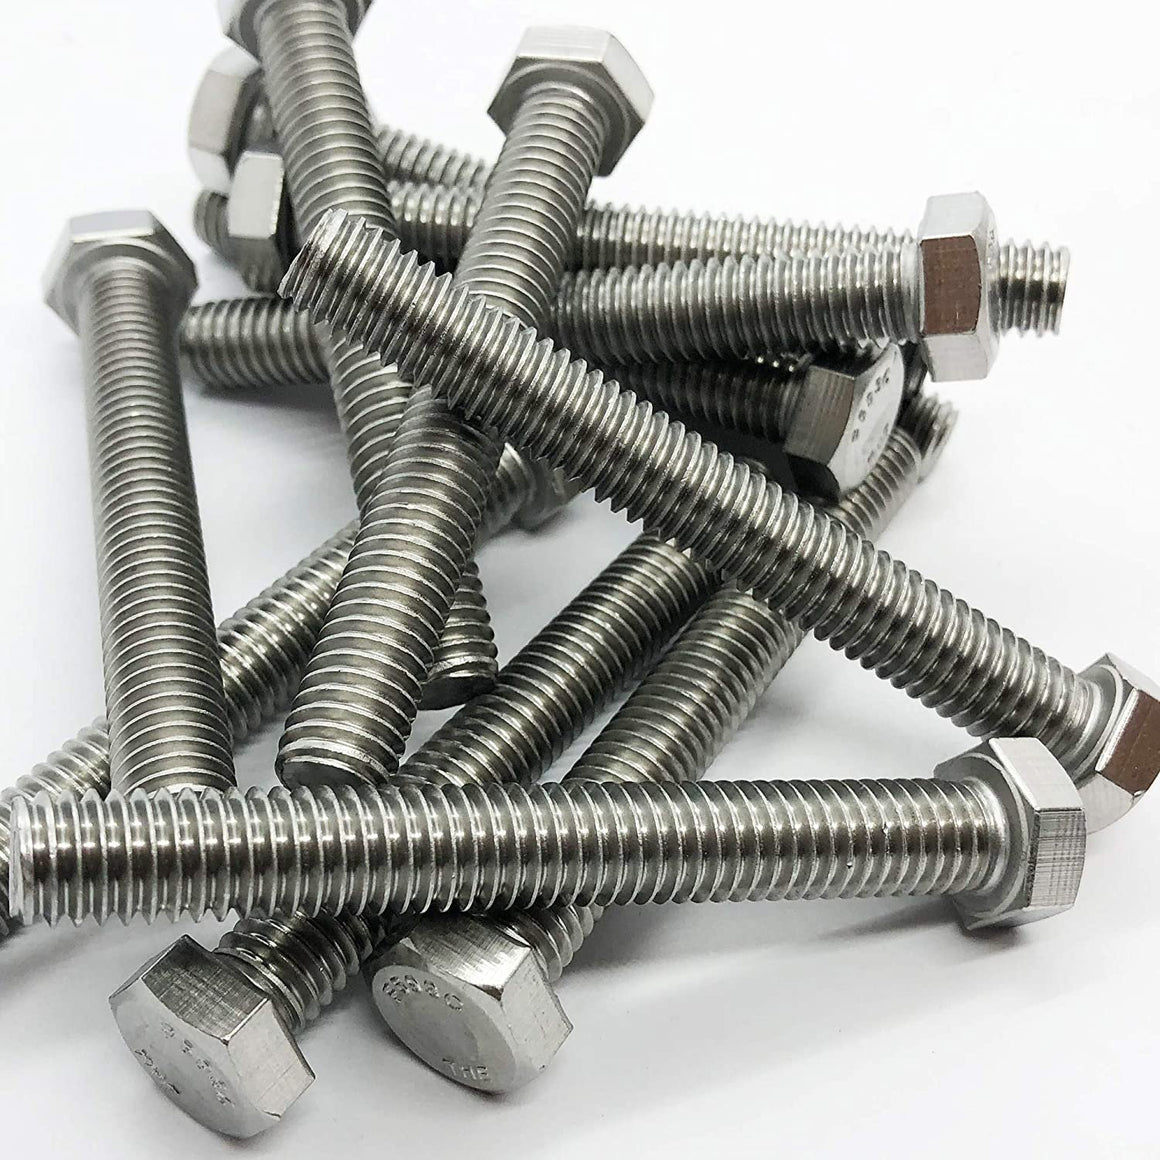 5/16"-18-4" - 304 Stainless Steel (18-8) - Hex Head Bolts - Machine Screws - Hardened Steel Bolts - Full Thread